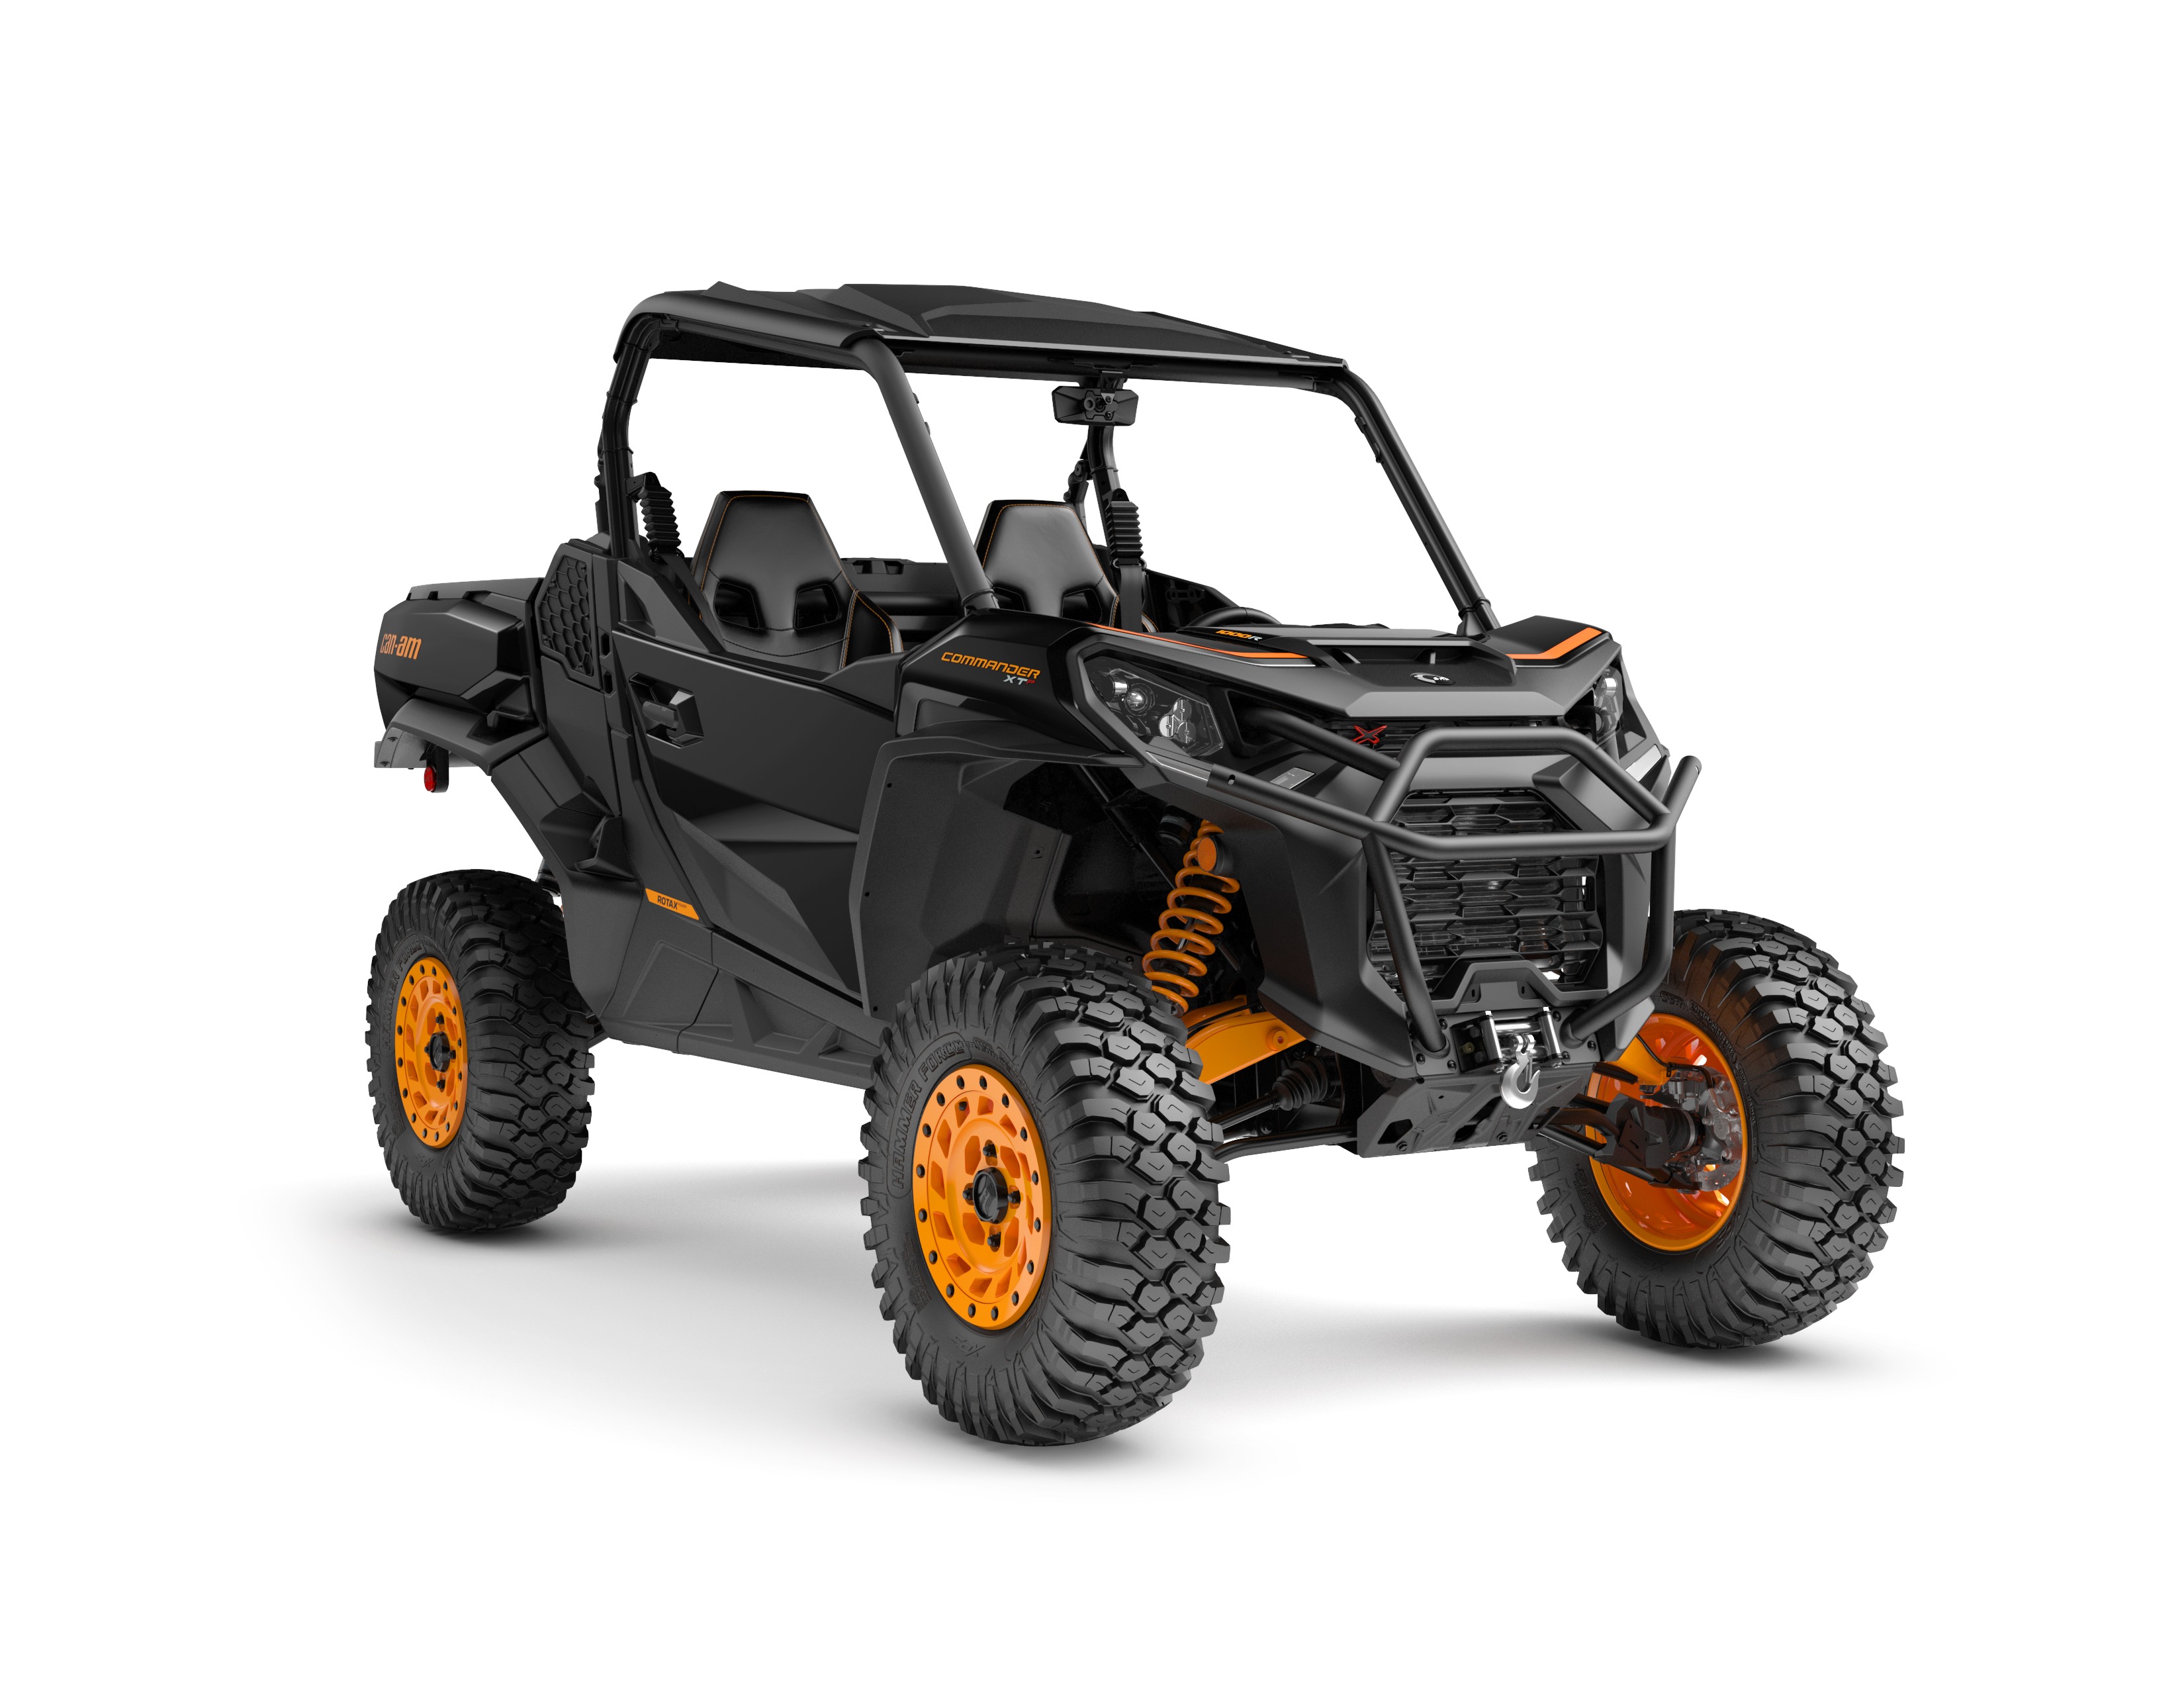 2021 CanAm Commander XTP 1000R Highlights and Specifications UTV OffRoad Magazine